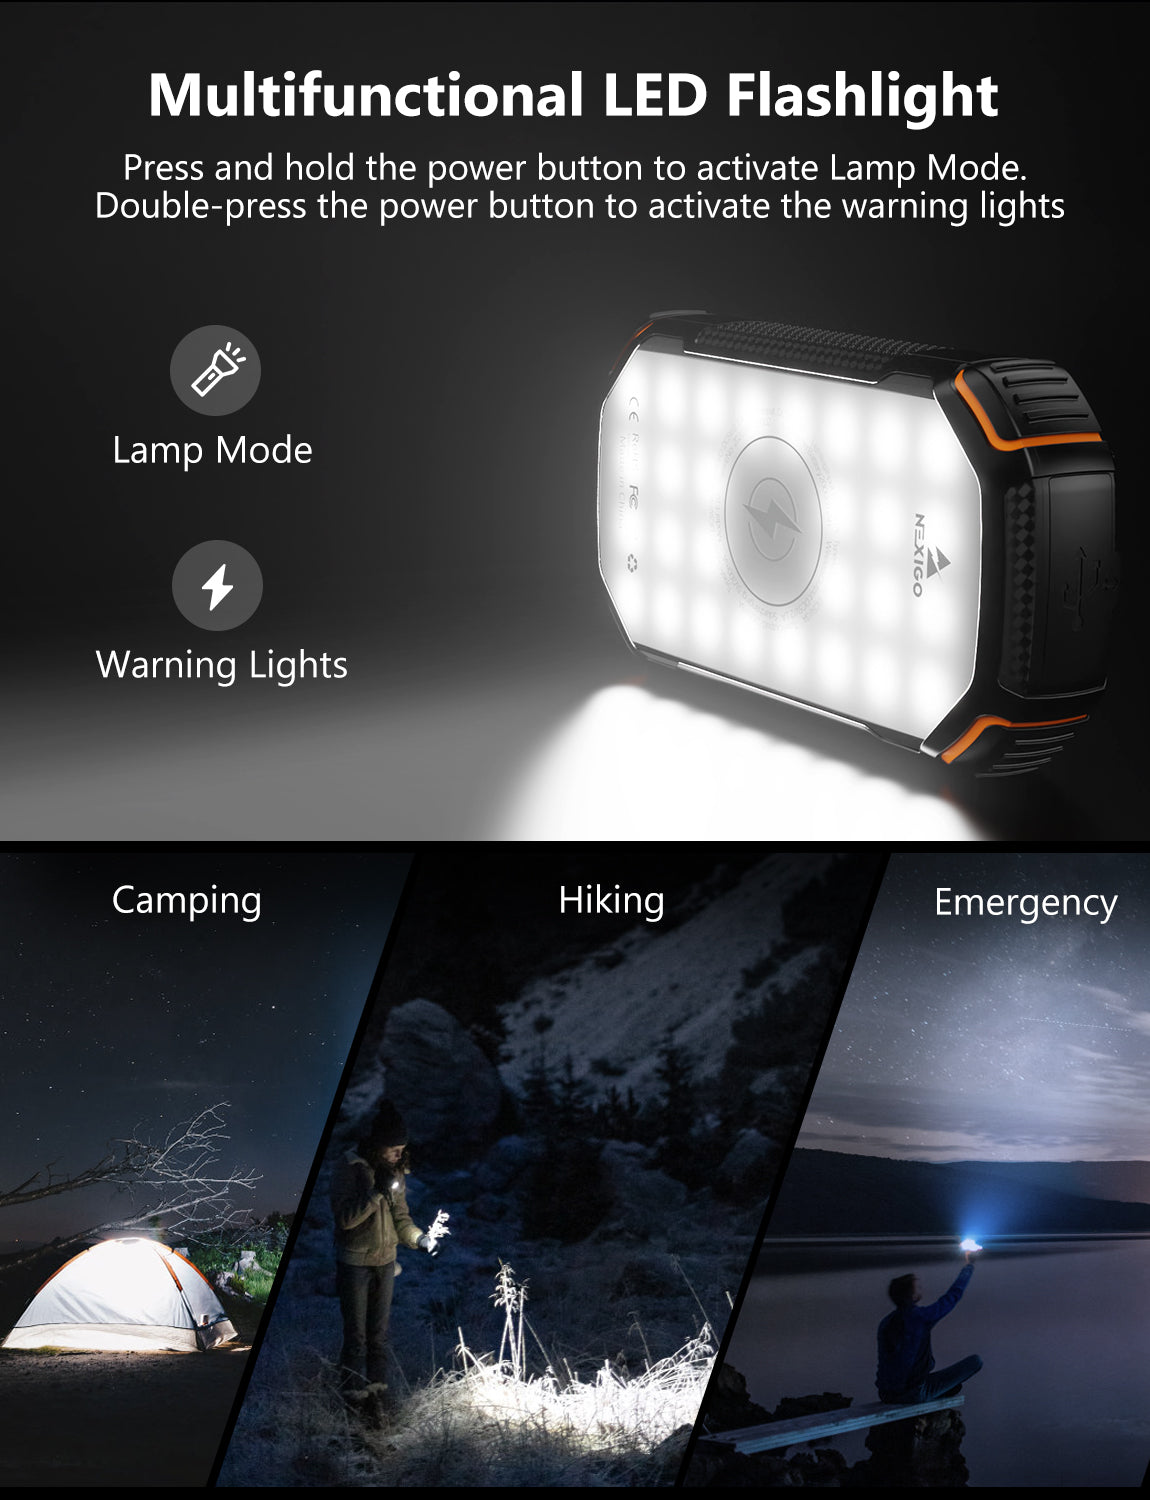 Lamp modes available. Utilize the power bank for camping, hiking, or emergencies. 